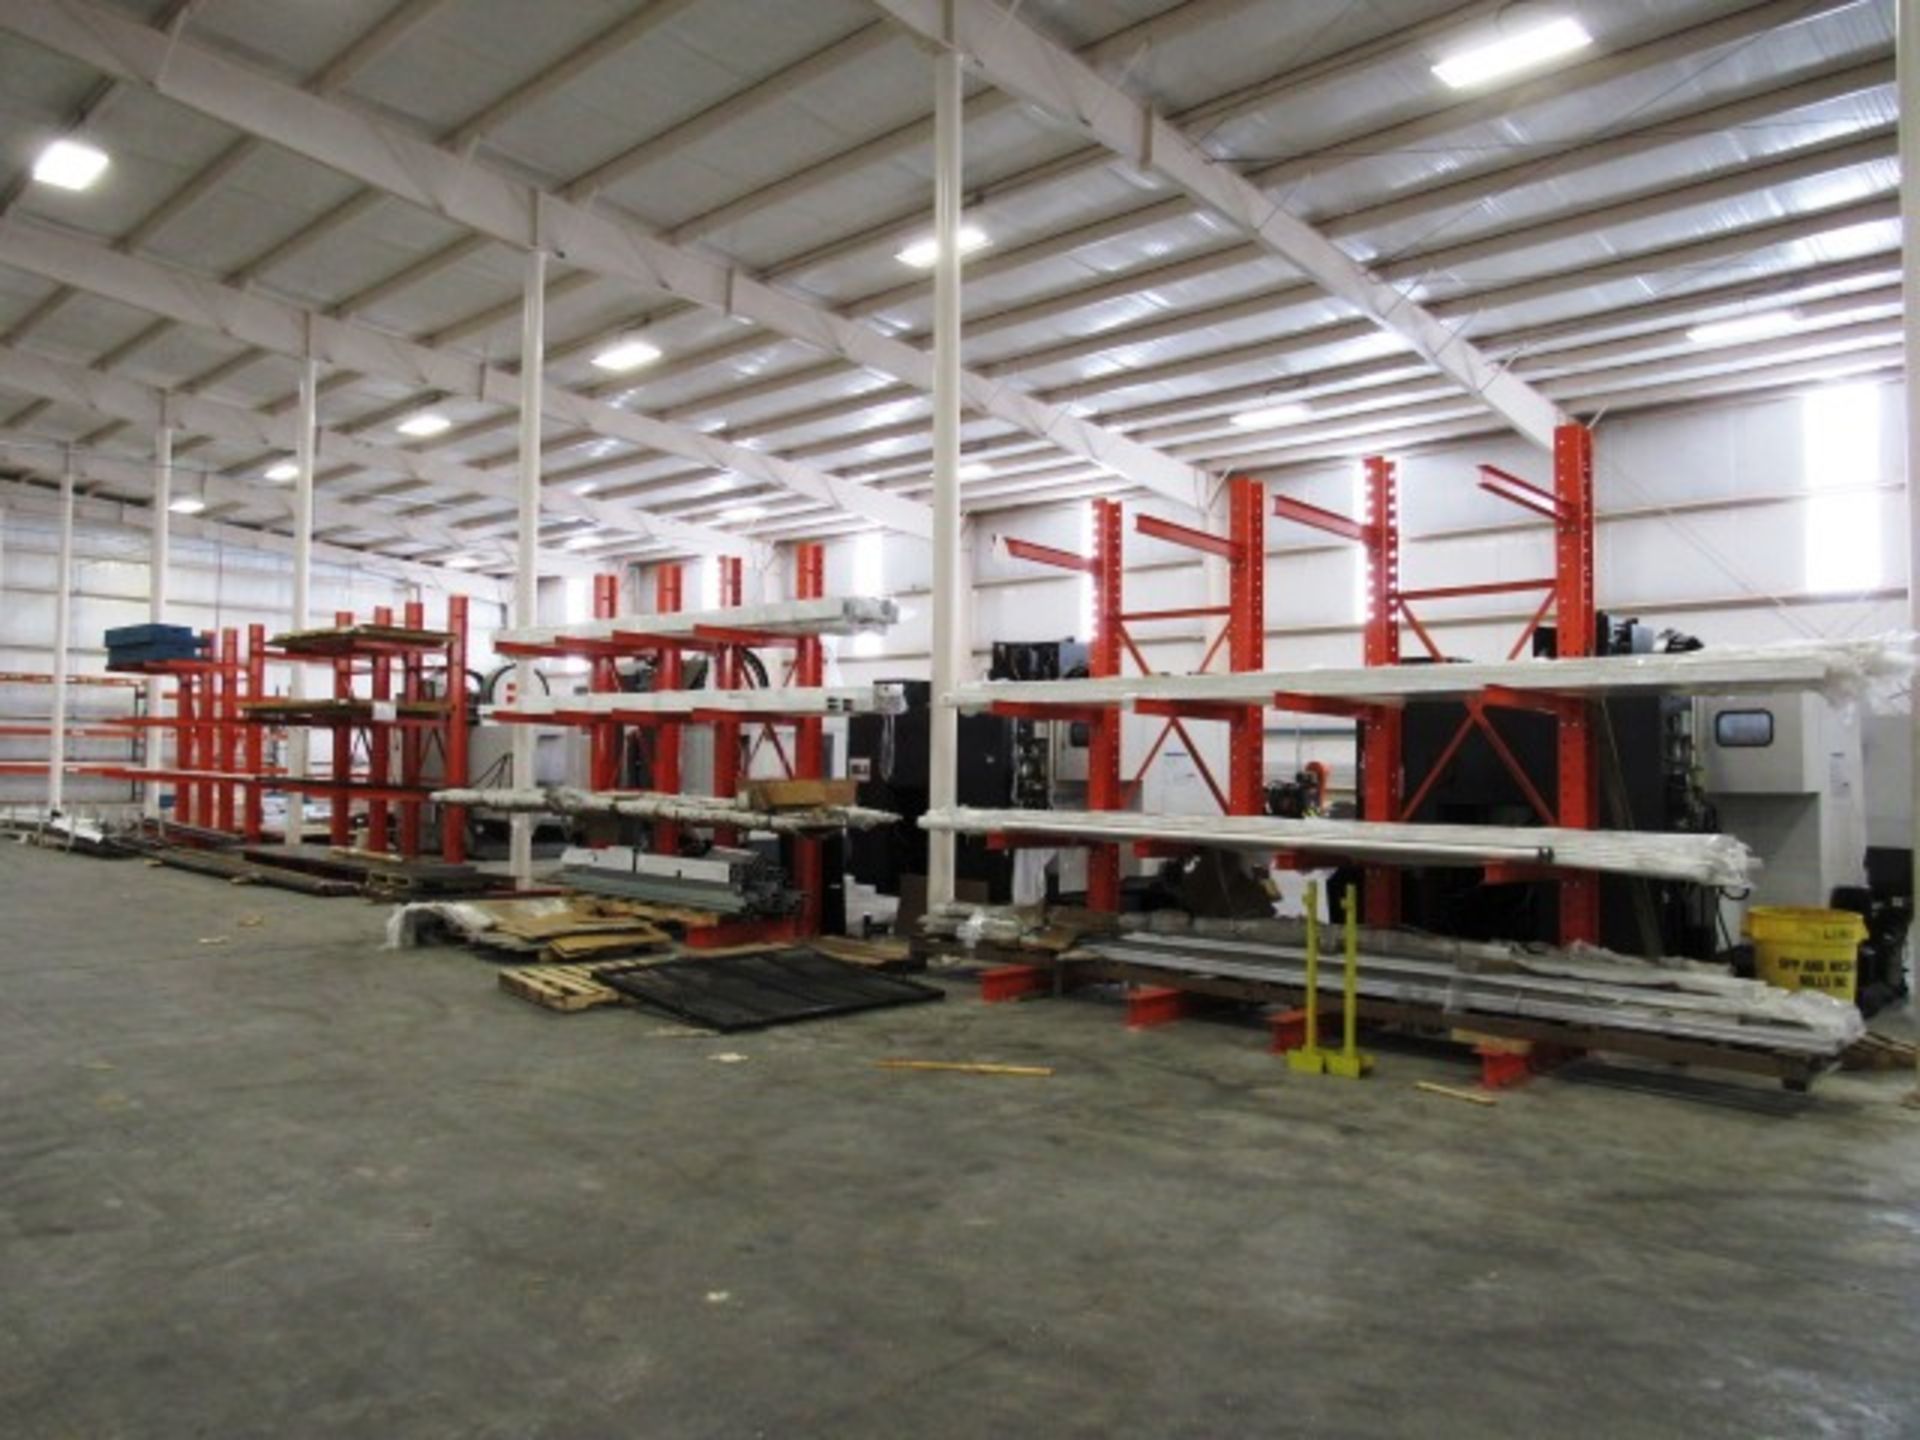 Aluminum Extrusion, Steel Plates & Roundstock (on (4) cantilever racks)